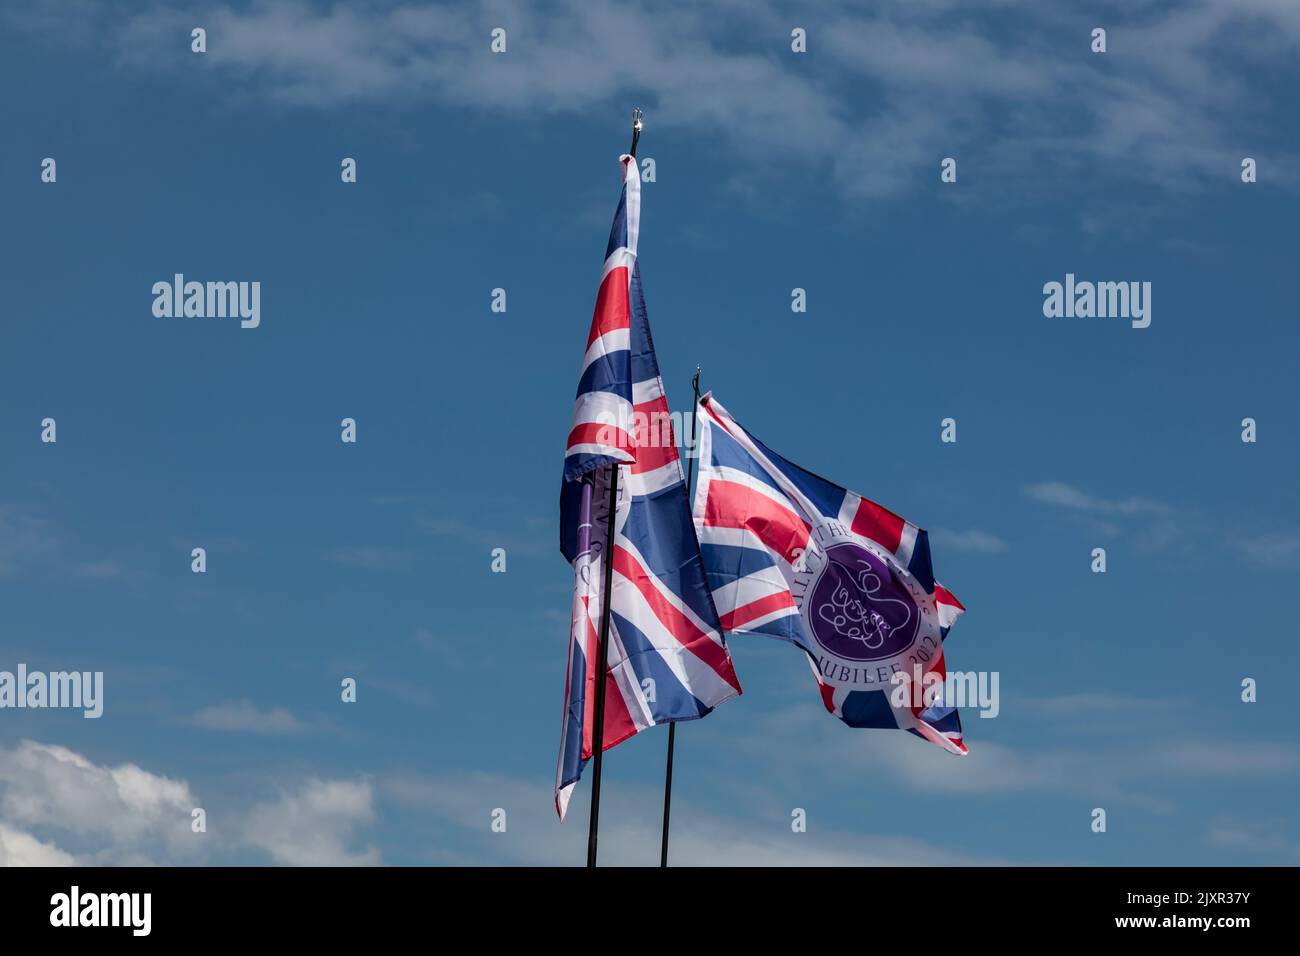 Special Platinum Jubilee Union flags fly against a blue sky. Stock Photo